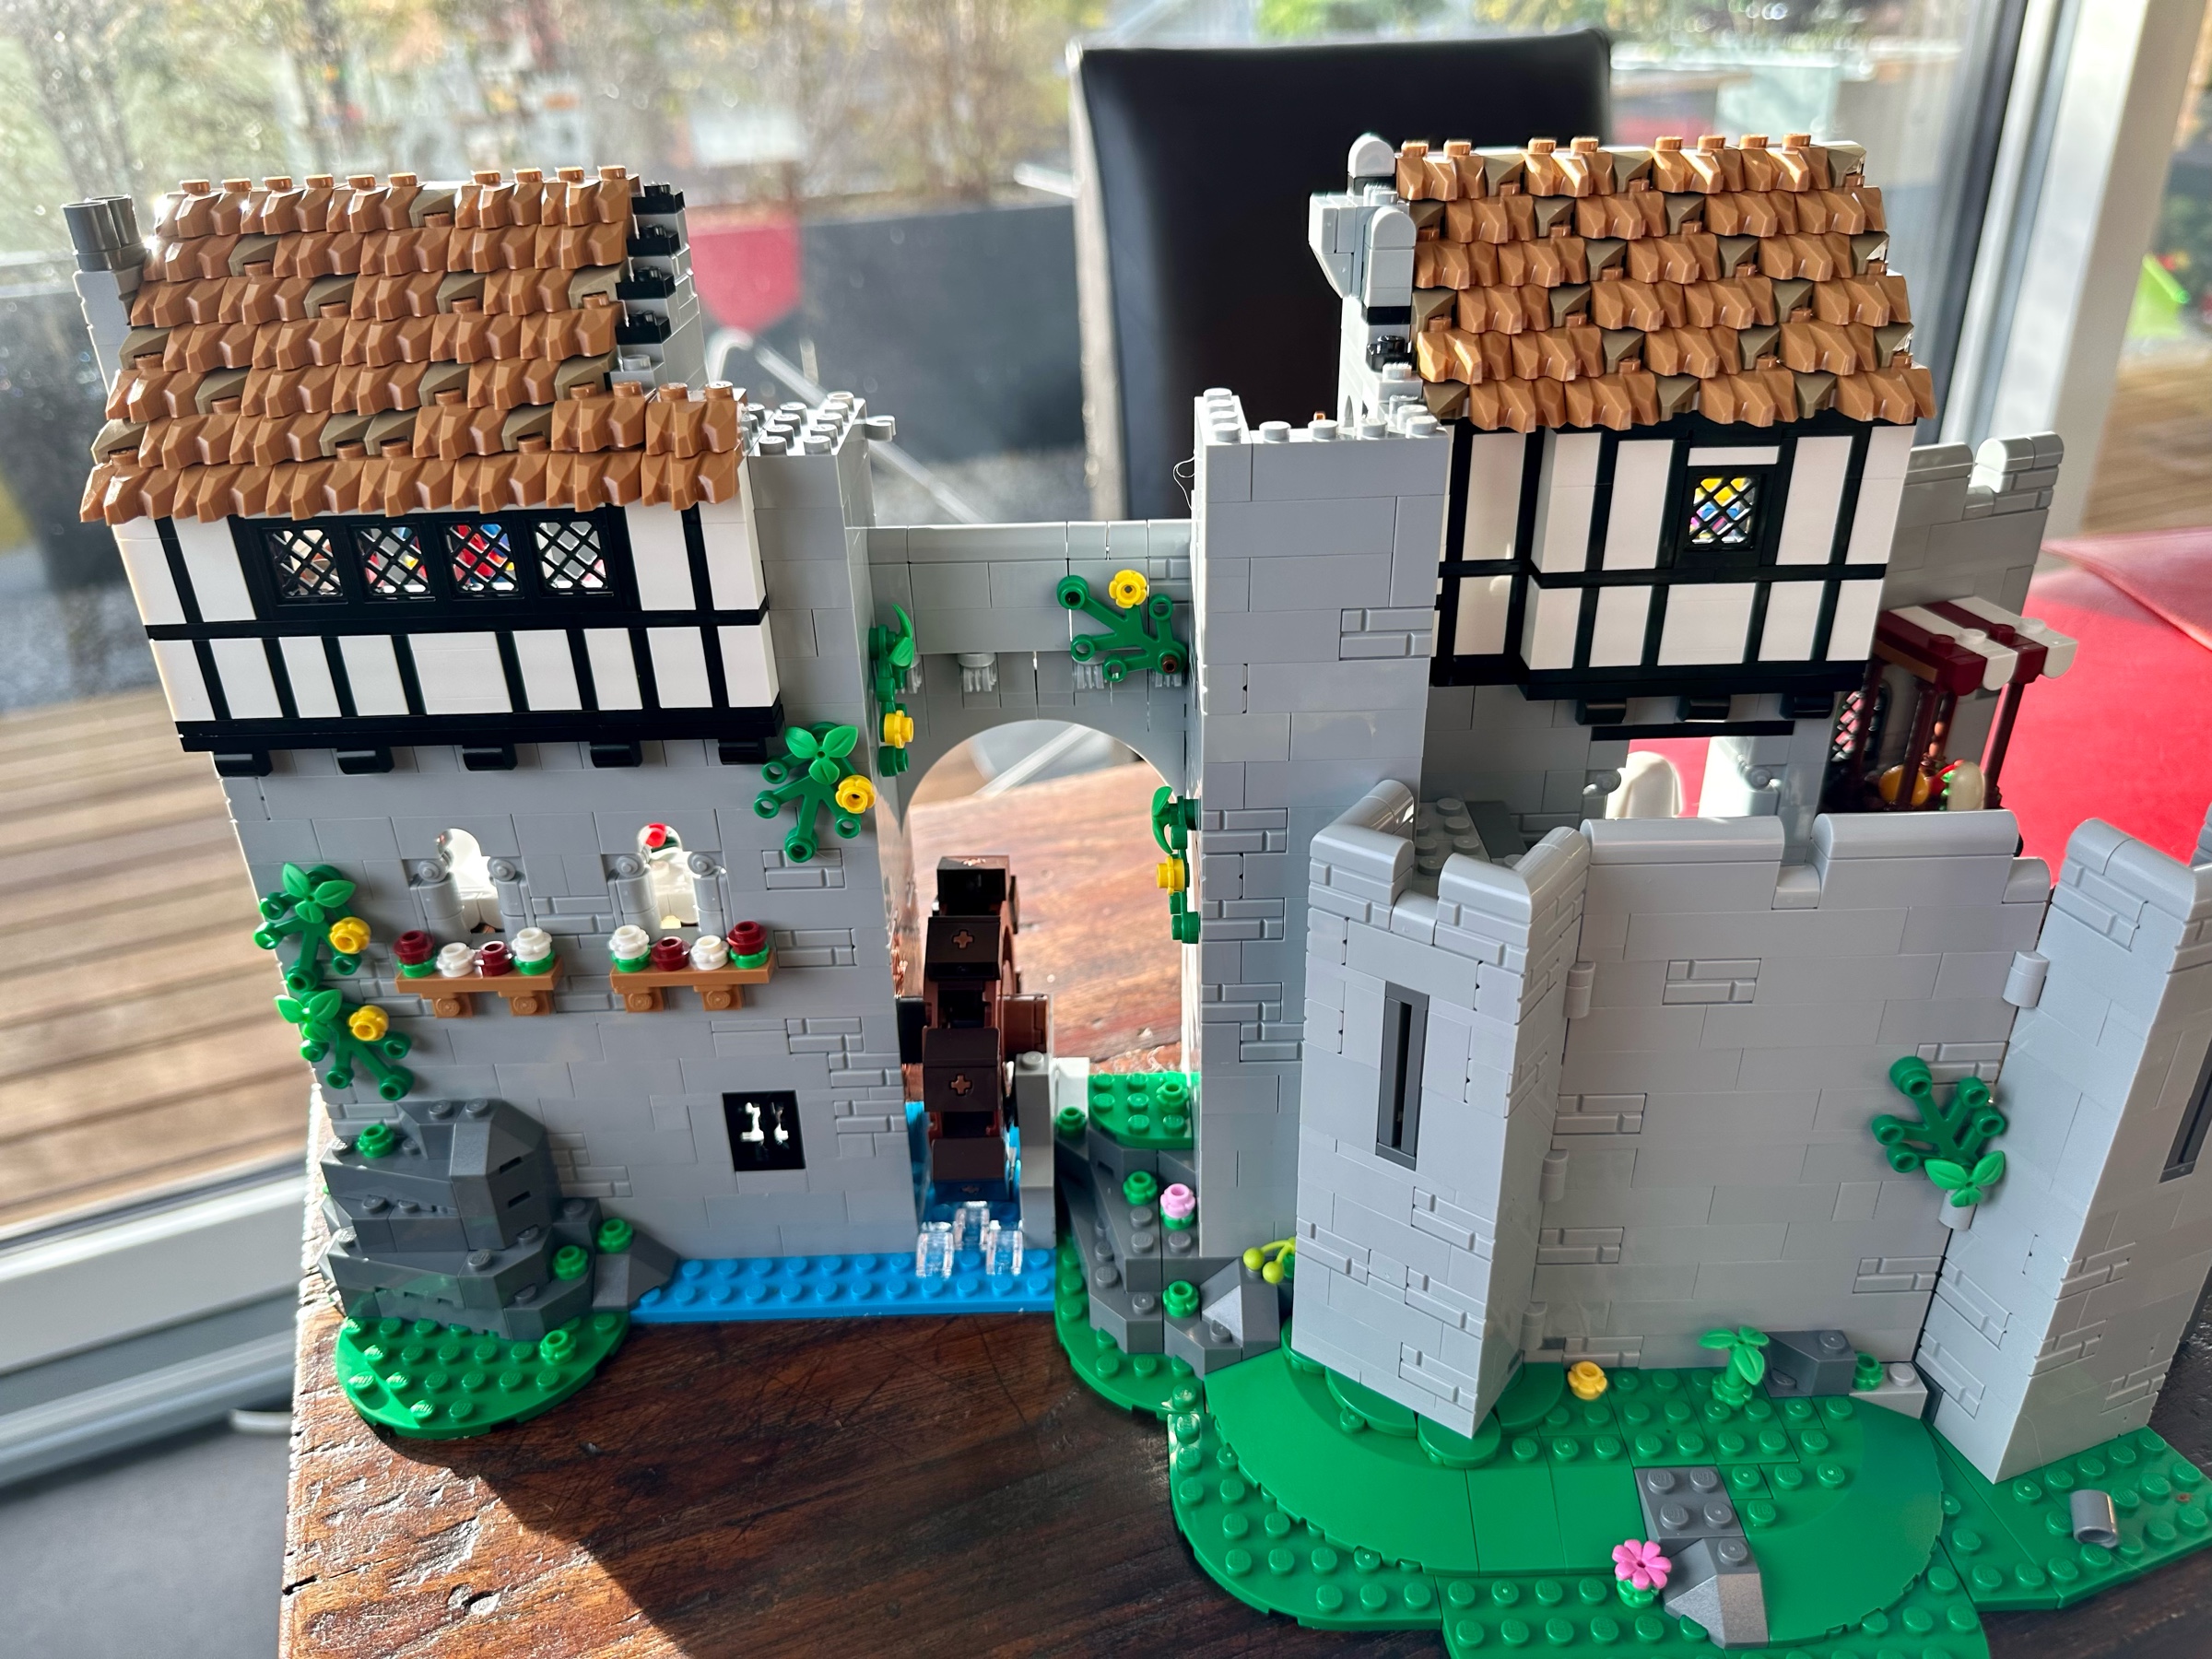 Exterior view of LEGO castle expanded. The lower floors are built of gray stone covered in some vines. The upper floor is built of white plaster and black wood and roofed with thatched straw.